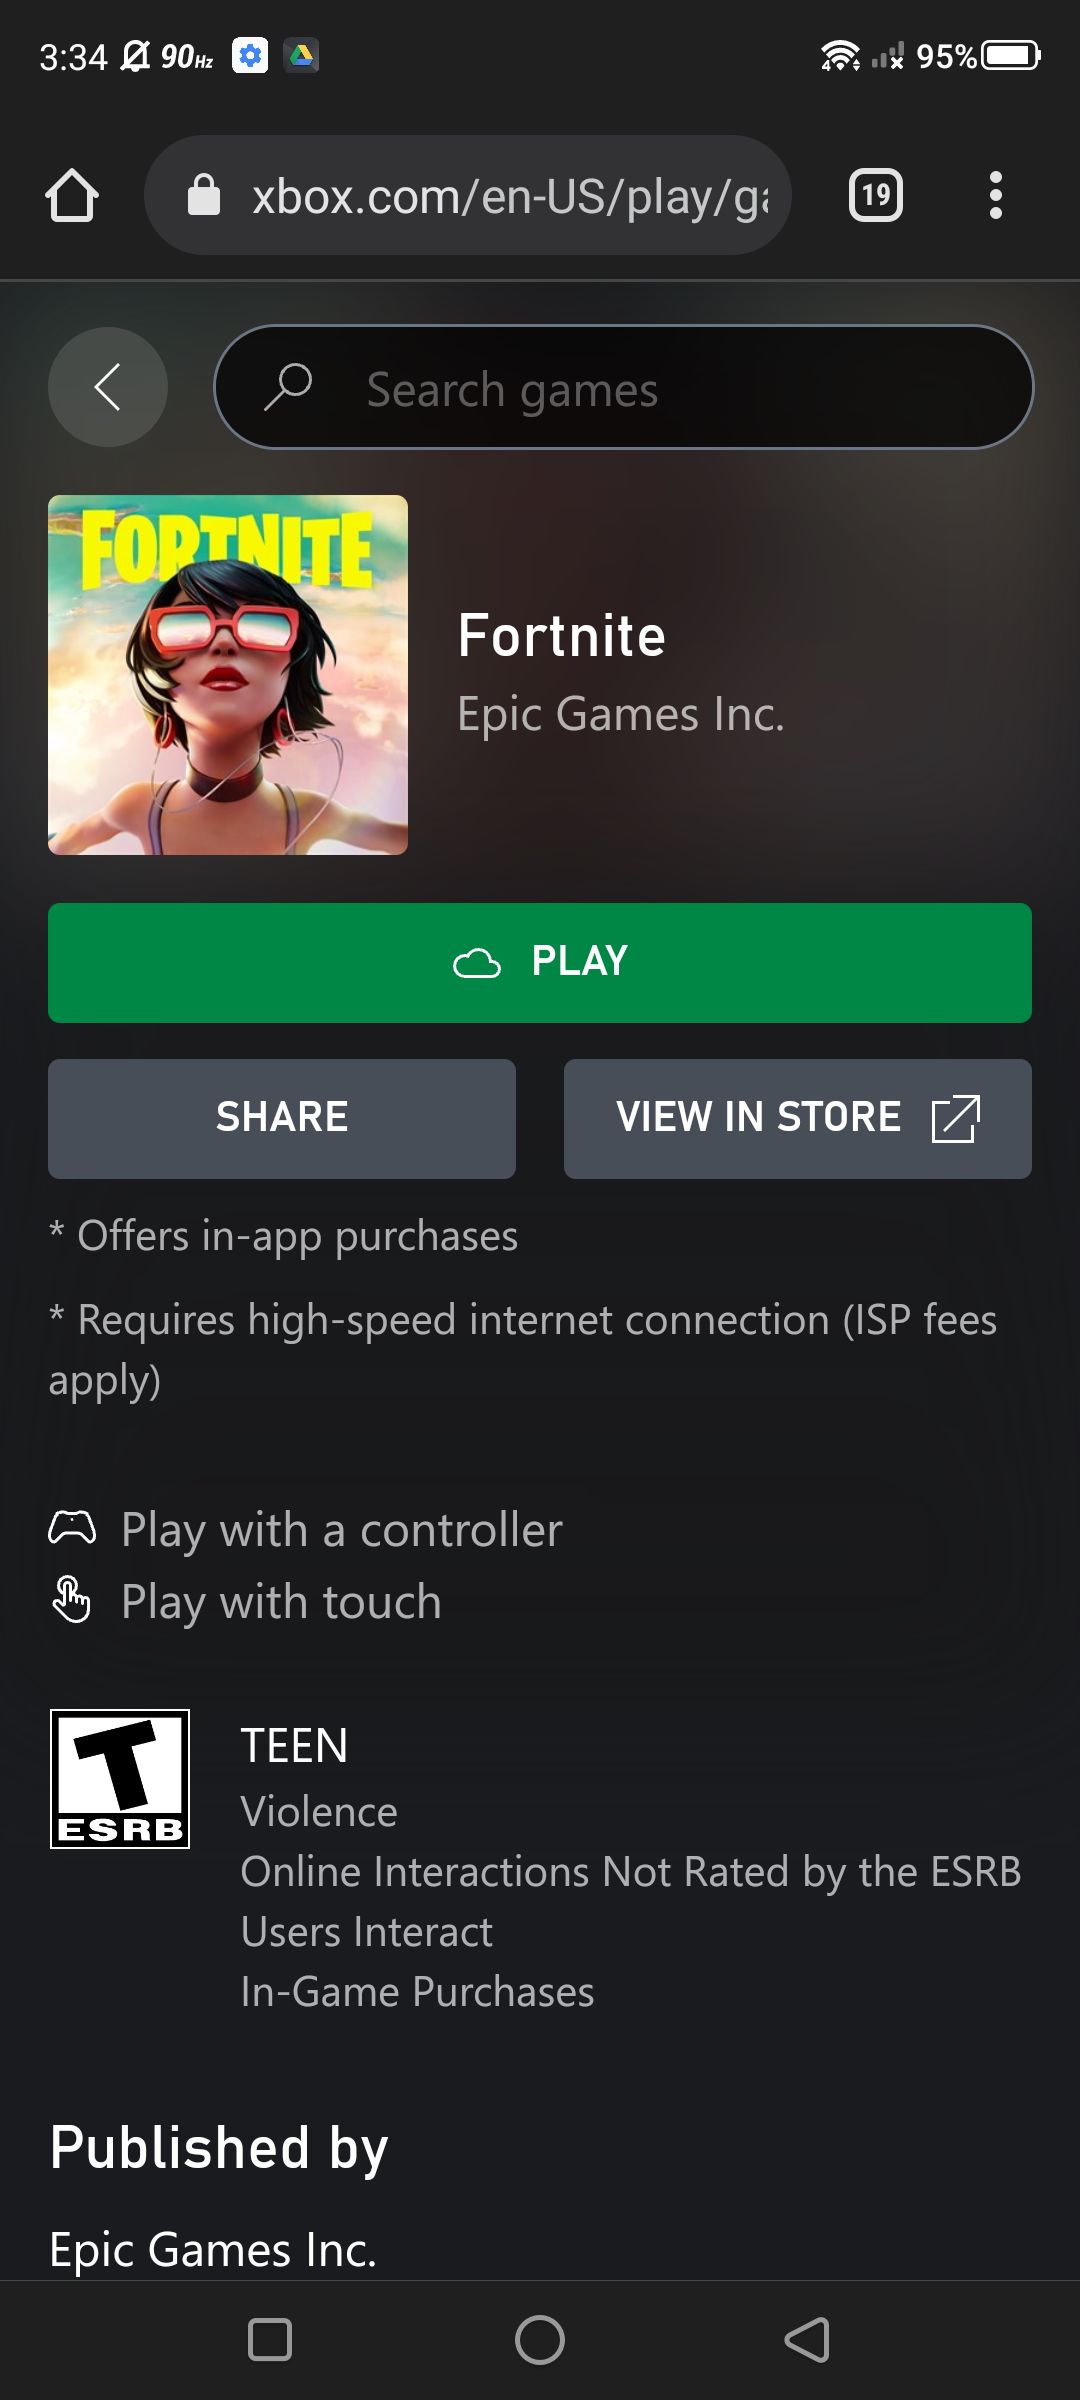 Fortnite's listing page on xCloud with play button